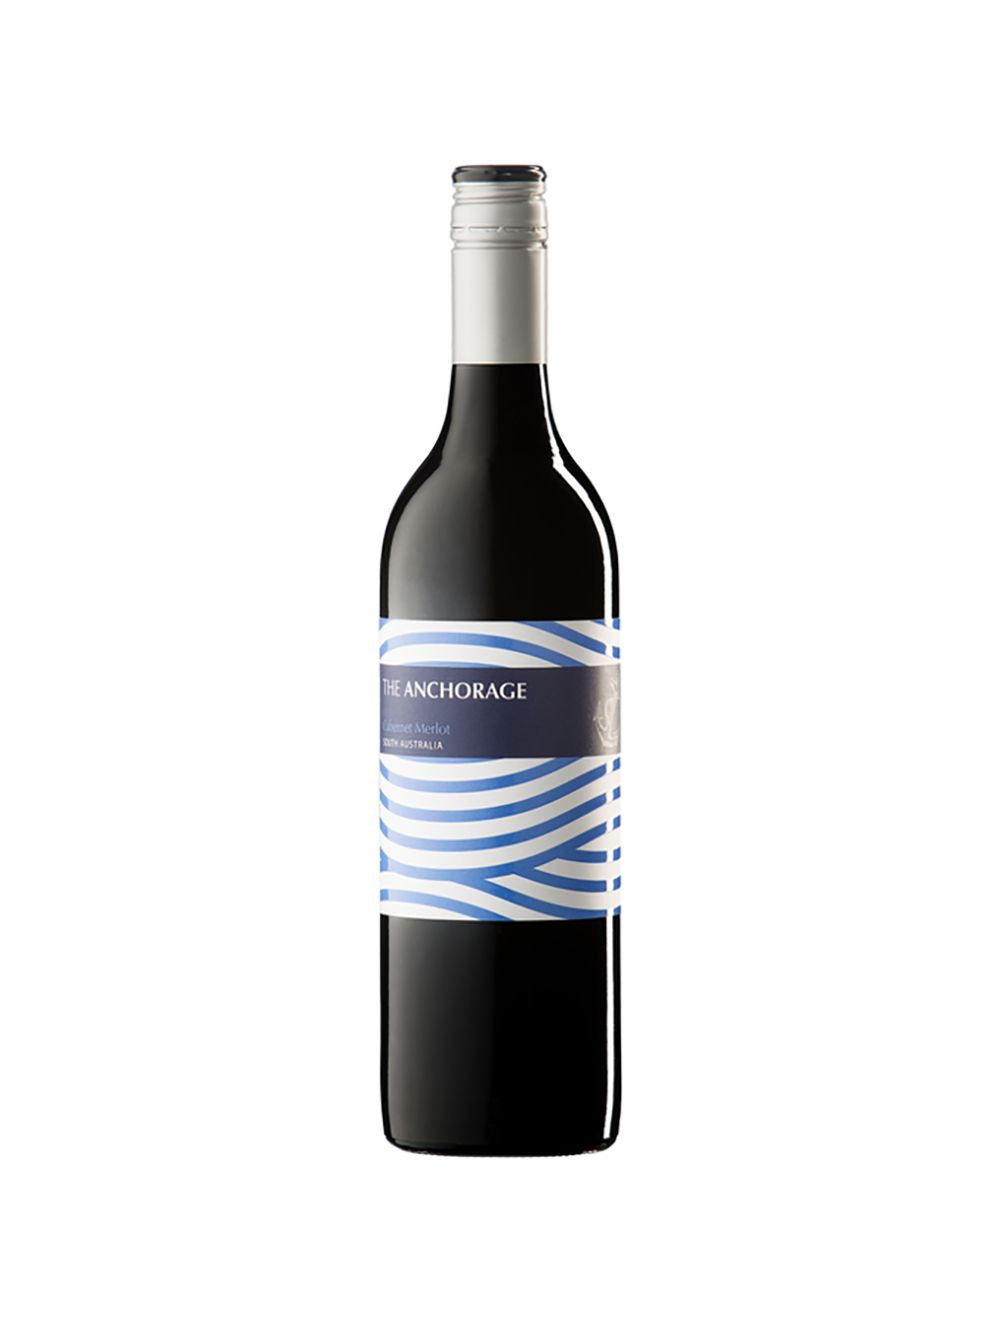 Add To A Gift: The Anchorage Cabernet Merlot 2019